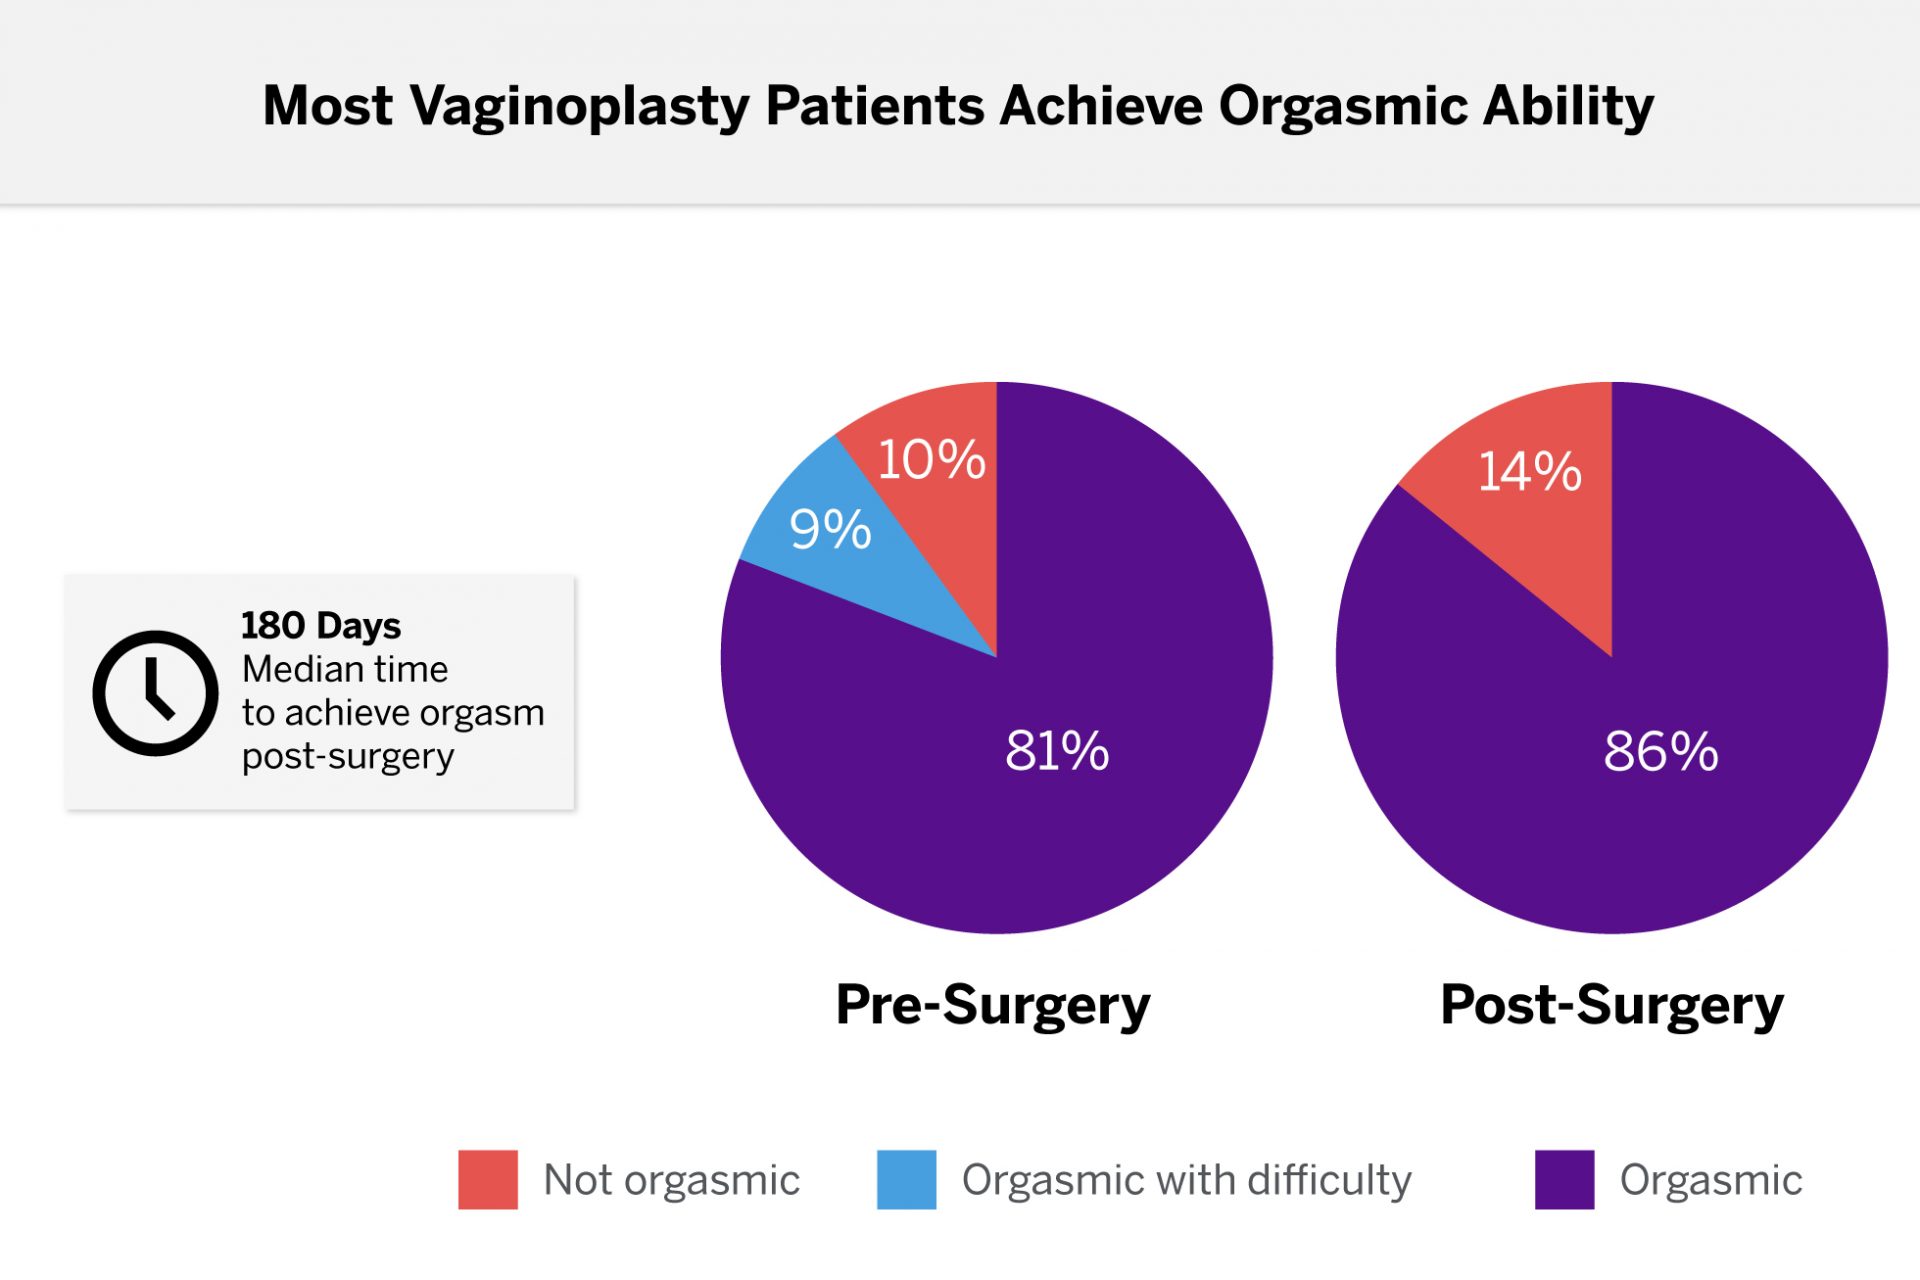 In a study of 199 patients who underwent gender-affirming robotic peritoneal flap vaginoplasty, 86% who completed one year or more of follow up were orgasmic, and the median time to achieve orgasm post-surgery was 180 days. Some previously anorgasmic patients also became newly orgasmic.